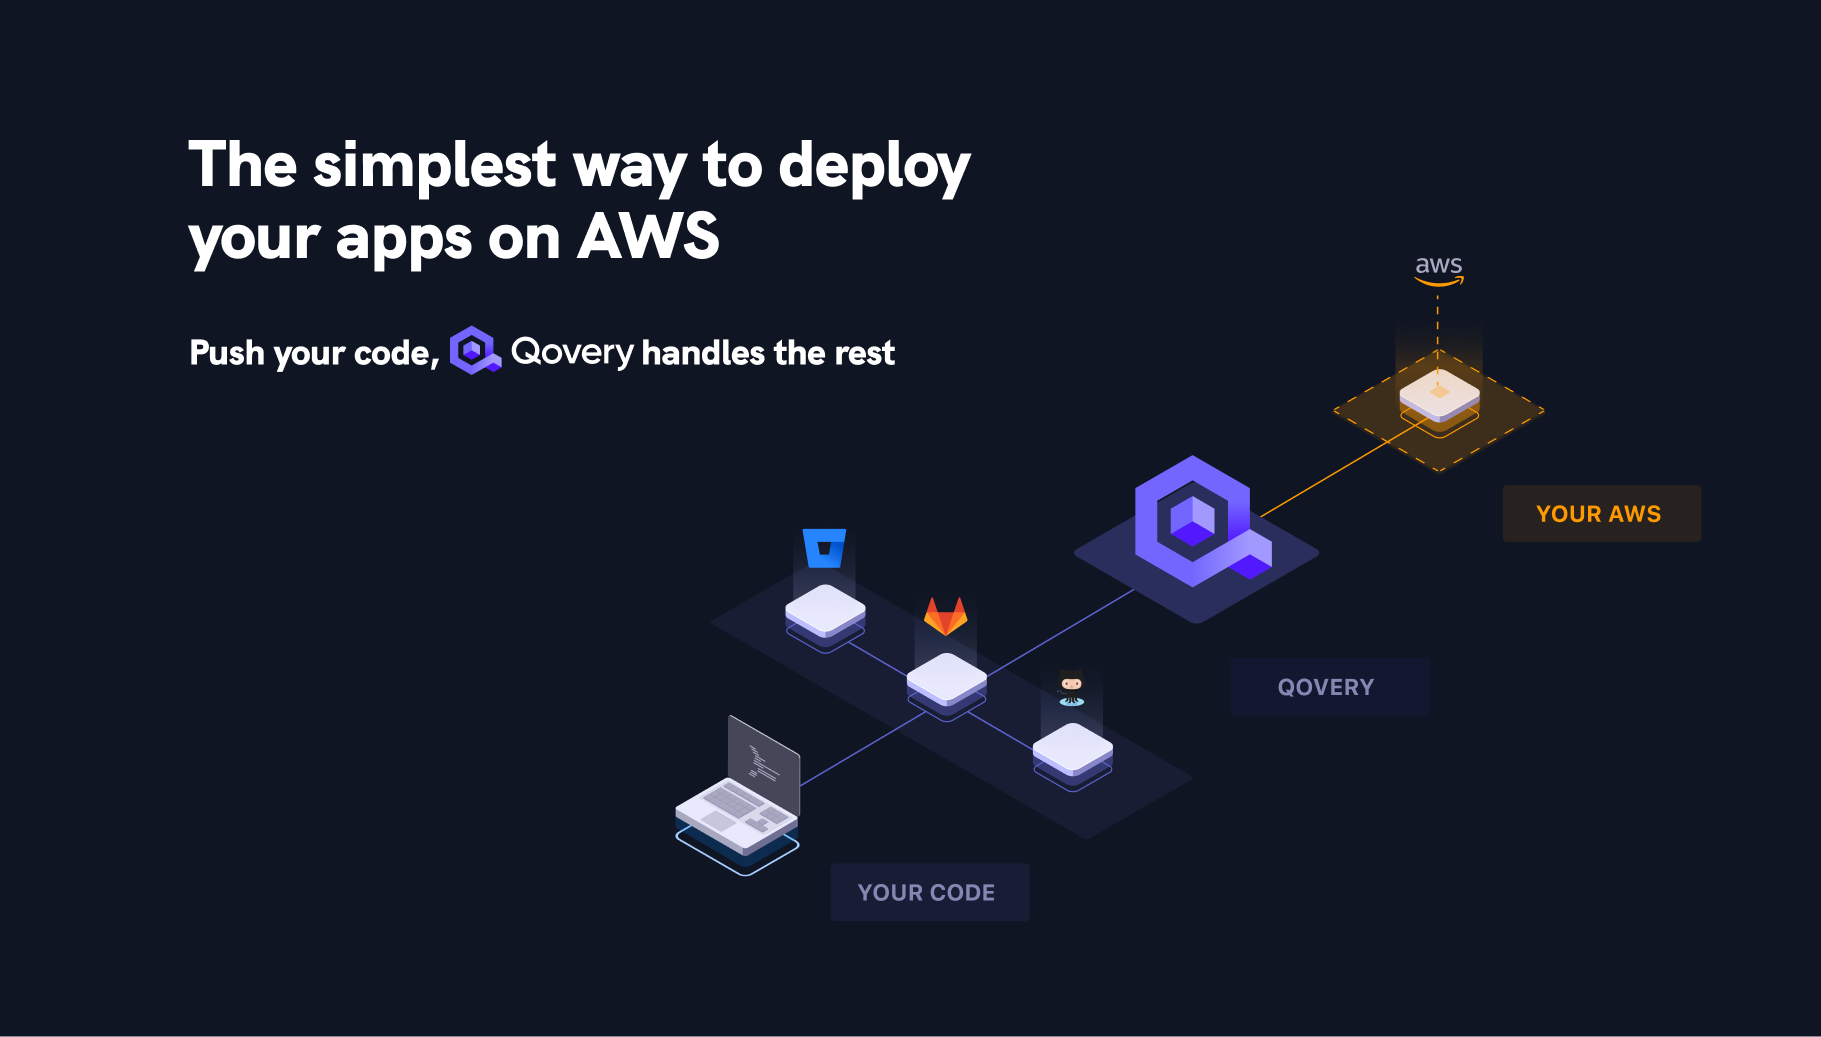 Qovery simplifies Kubernetes management on AWS and Digital Ocean